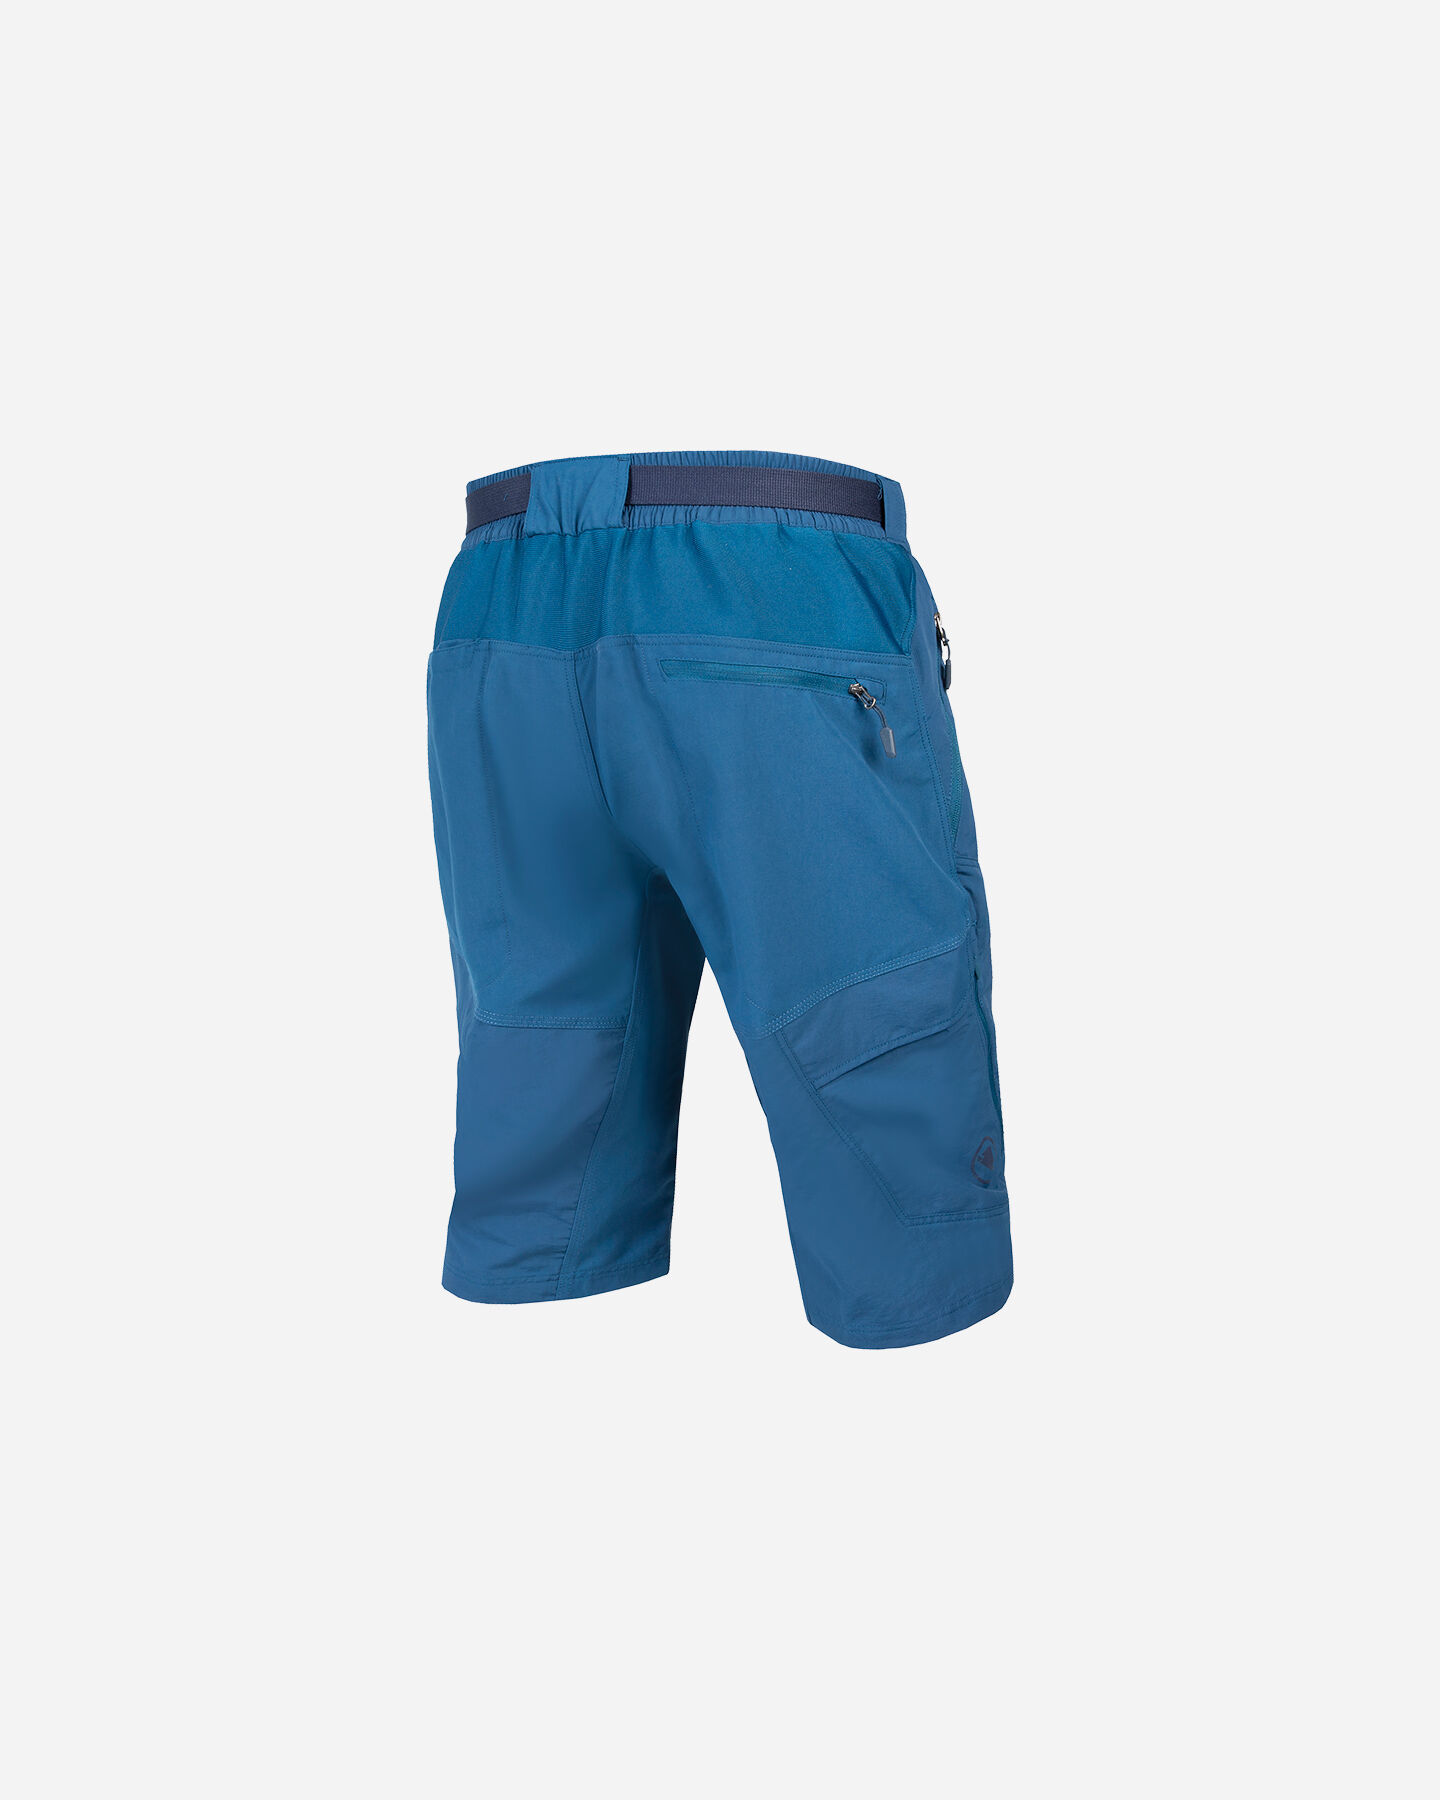  Short ciclismo ENDURA HUMMVEE WITH LINER M S4123646|1|L scatto 1